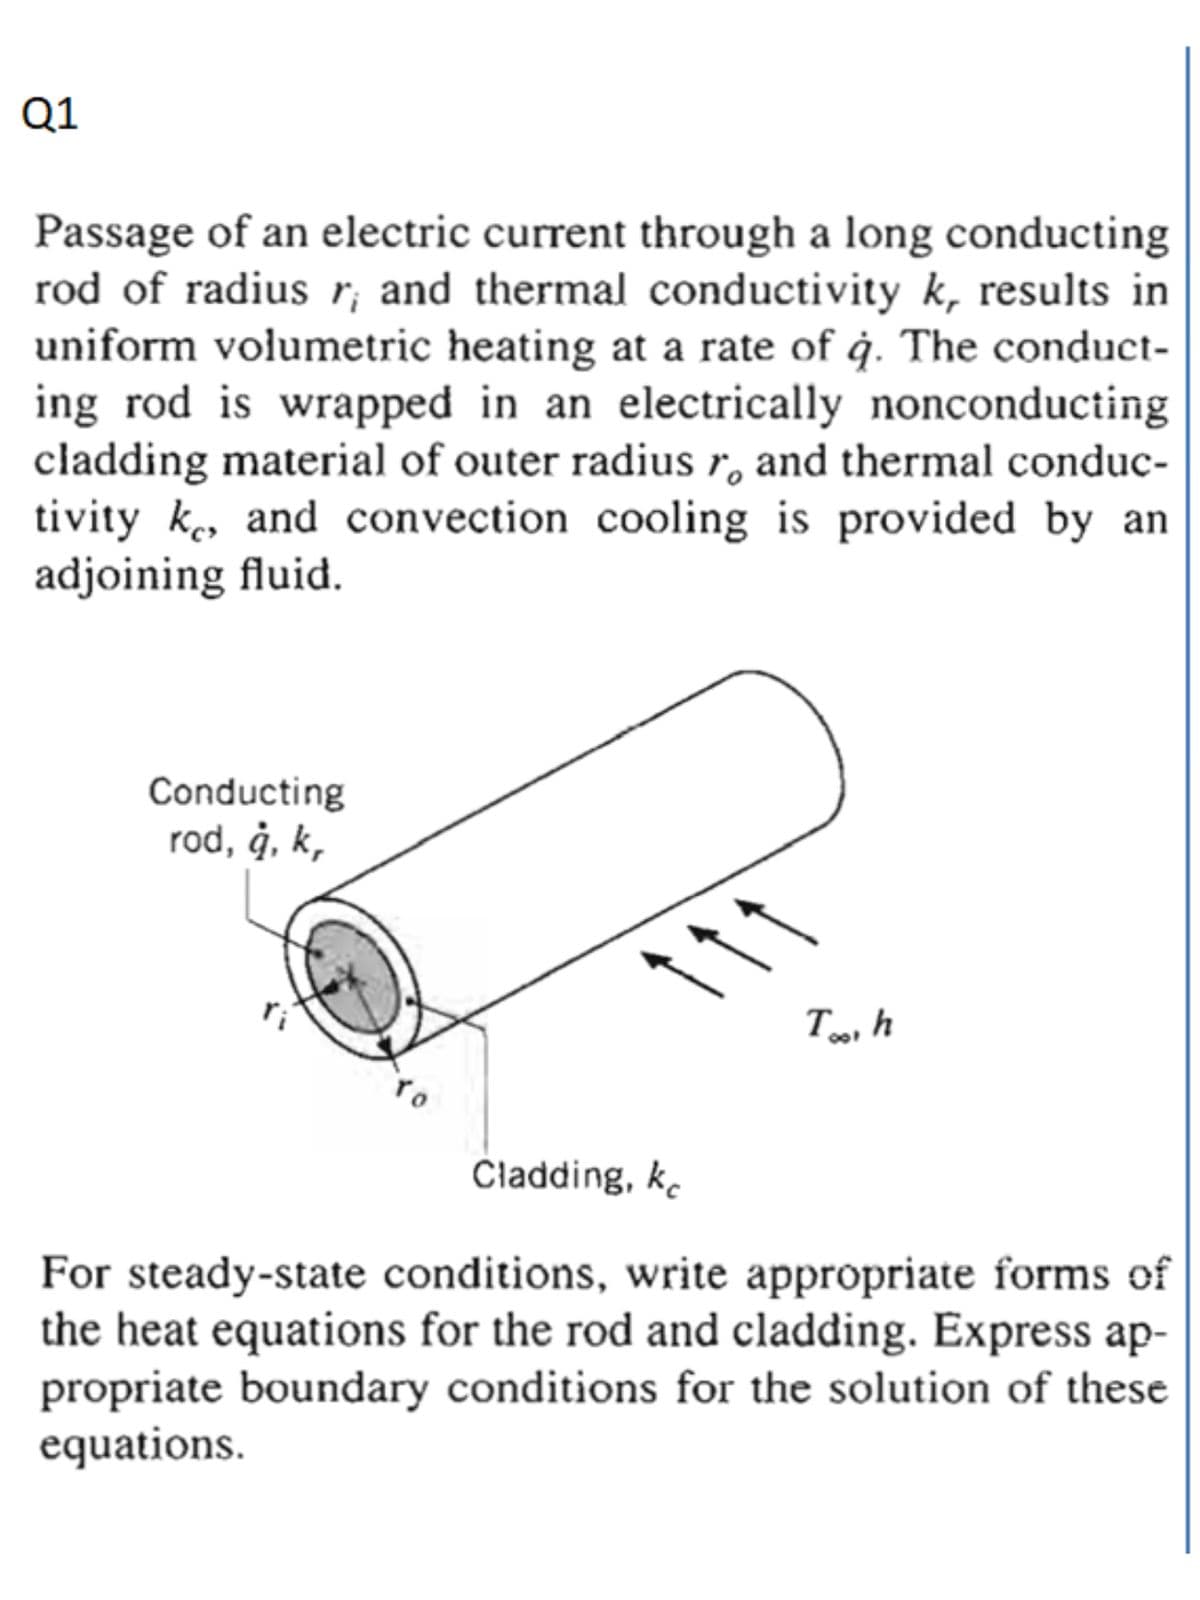 Q1
Passage of an electric current through a long conducting
rod of radius r; and thermal conductivity k, results in
uniform volumetric heating at a rate of ġ. The conduct-
ing rod is wrapped in an electrically nonconducting
cladding material of outer radius r, and thermal conduc-
tivity k, and convection cooling is provided by an
adjoining fluid.
Conducting
rod, ġ, k,
11
To
Čladding, ke
For steady-state conditions, write appropriate forms of
the heat equations for the rod and cladding. Express ap-
propriate boundary conditions for the solution of these
equations.
